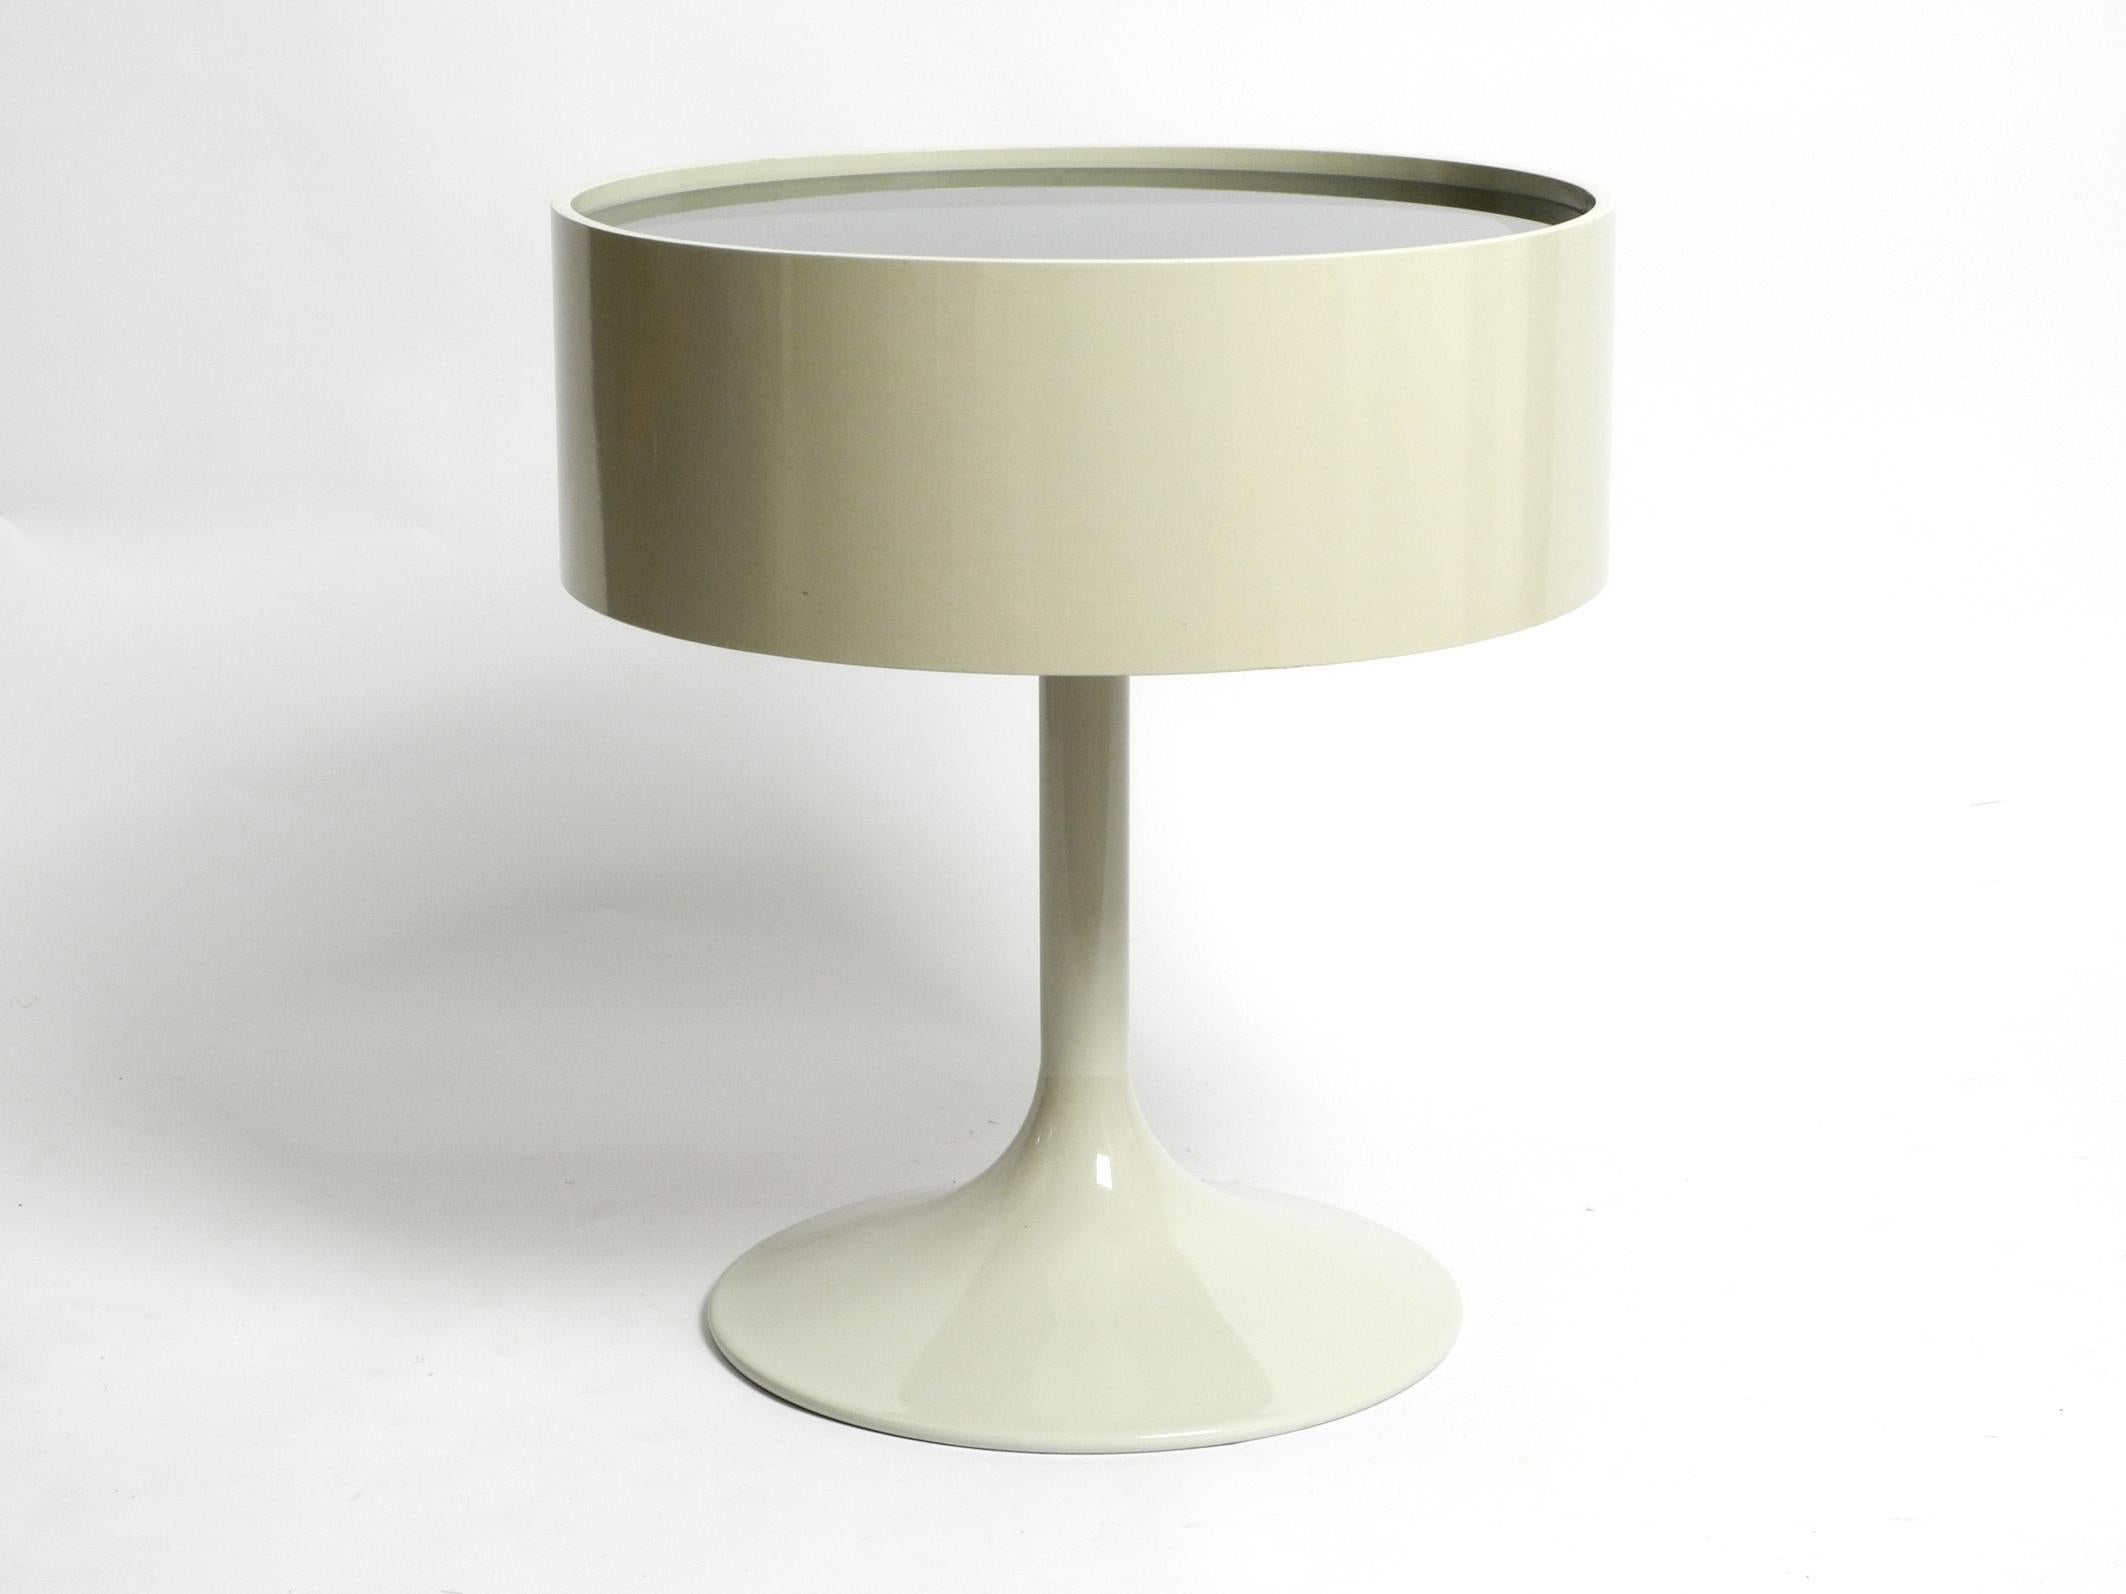 German Rare 1970s Side Table in Space Age Design with Smoked Glass Top by OPAL Möbel